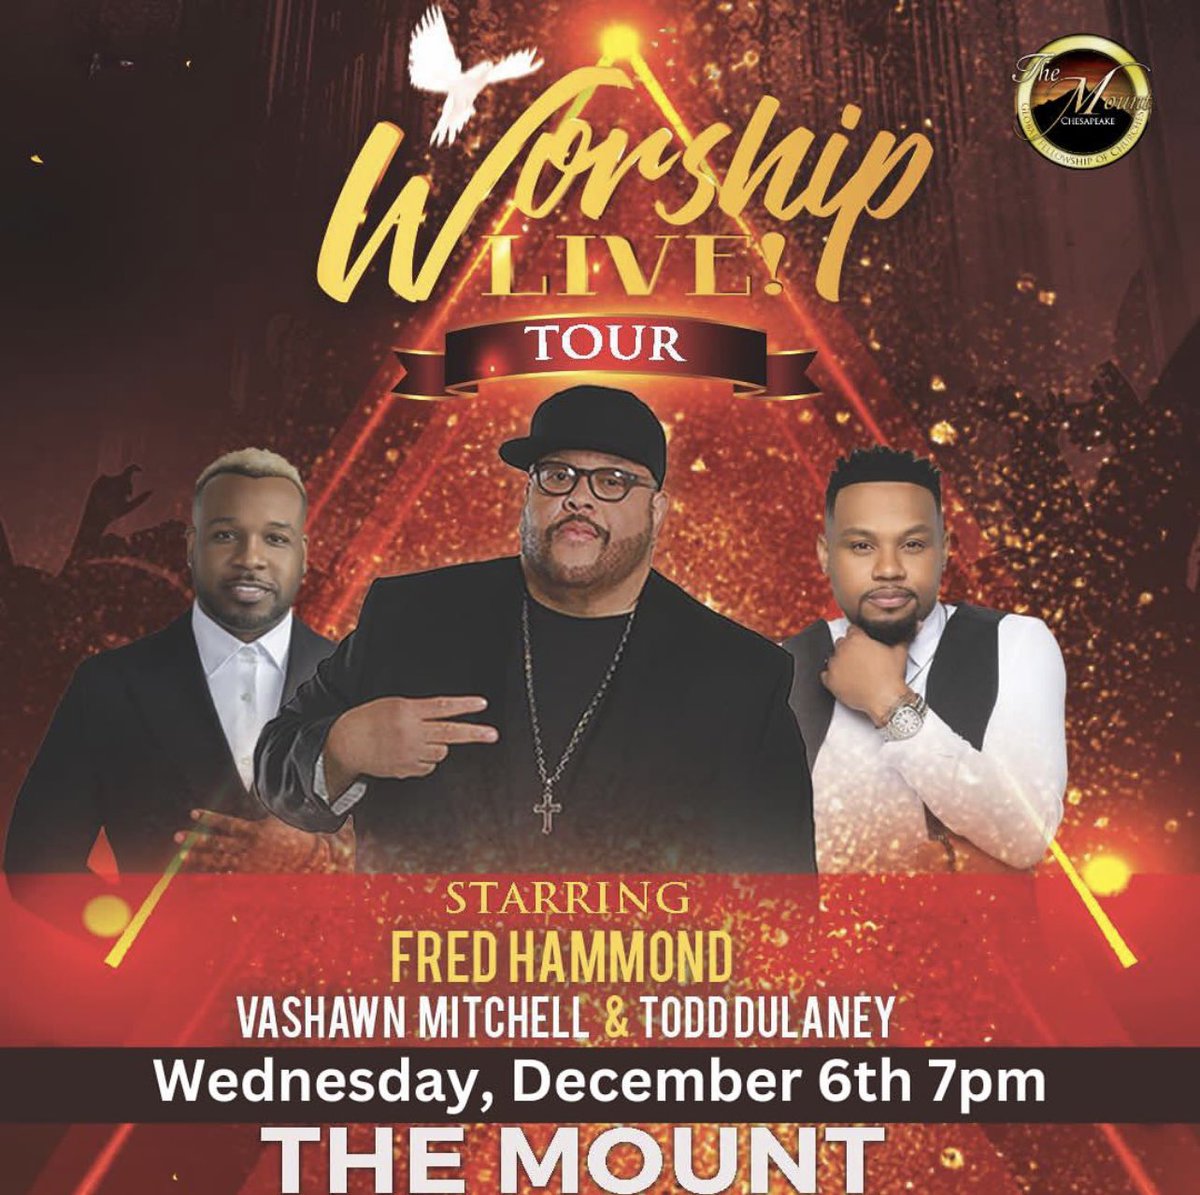 @RealFredHammond , @VaShawnMitchell & #ToddDulaney are coming to The Mount. Check flyer for details and get your tickets!  🔥🔥🔥 @TheMountBishop